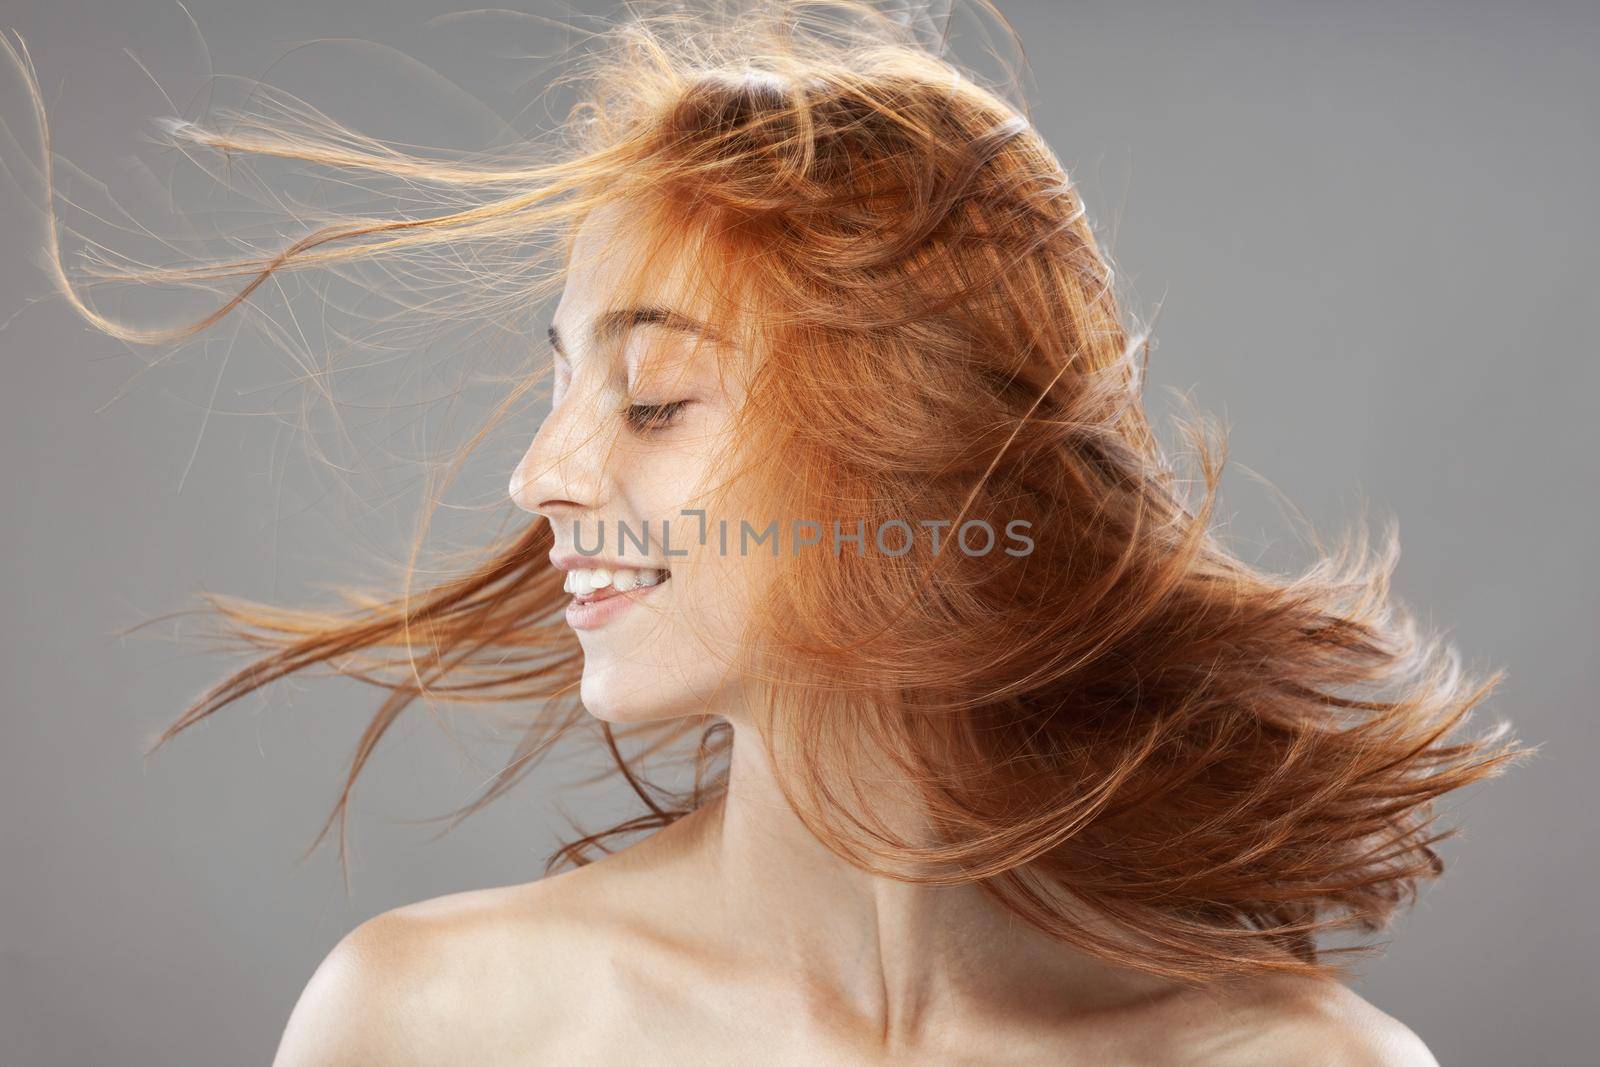 Beautiful dark burnt orange windy hair girl smiling. Studio portrait with happy face expression against gray background... by kokimk